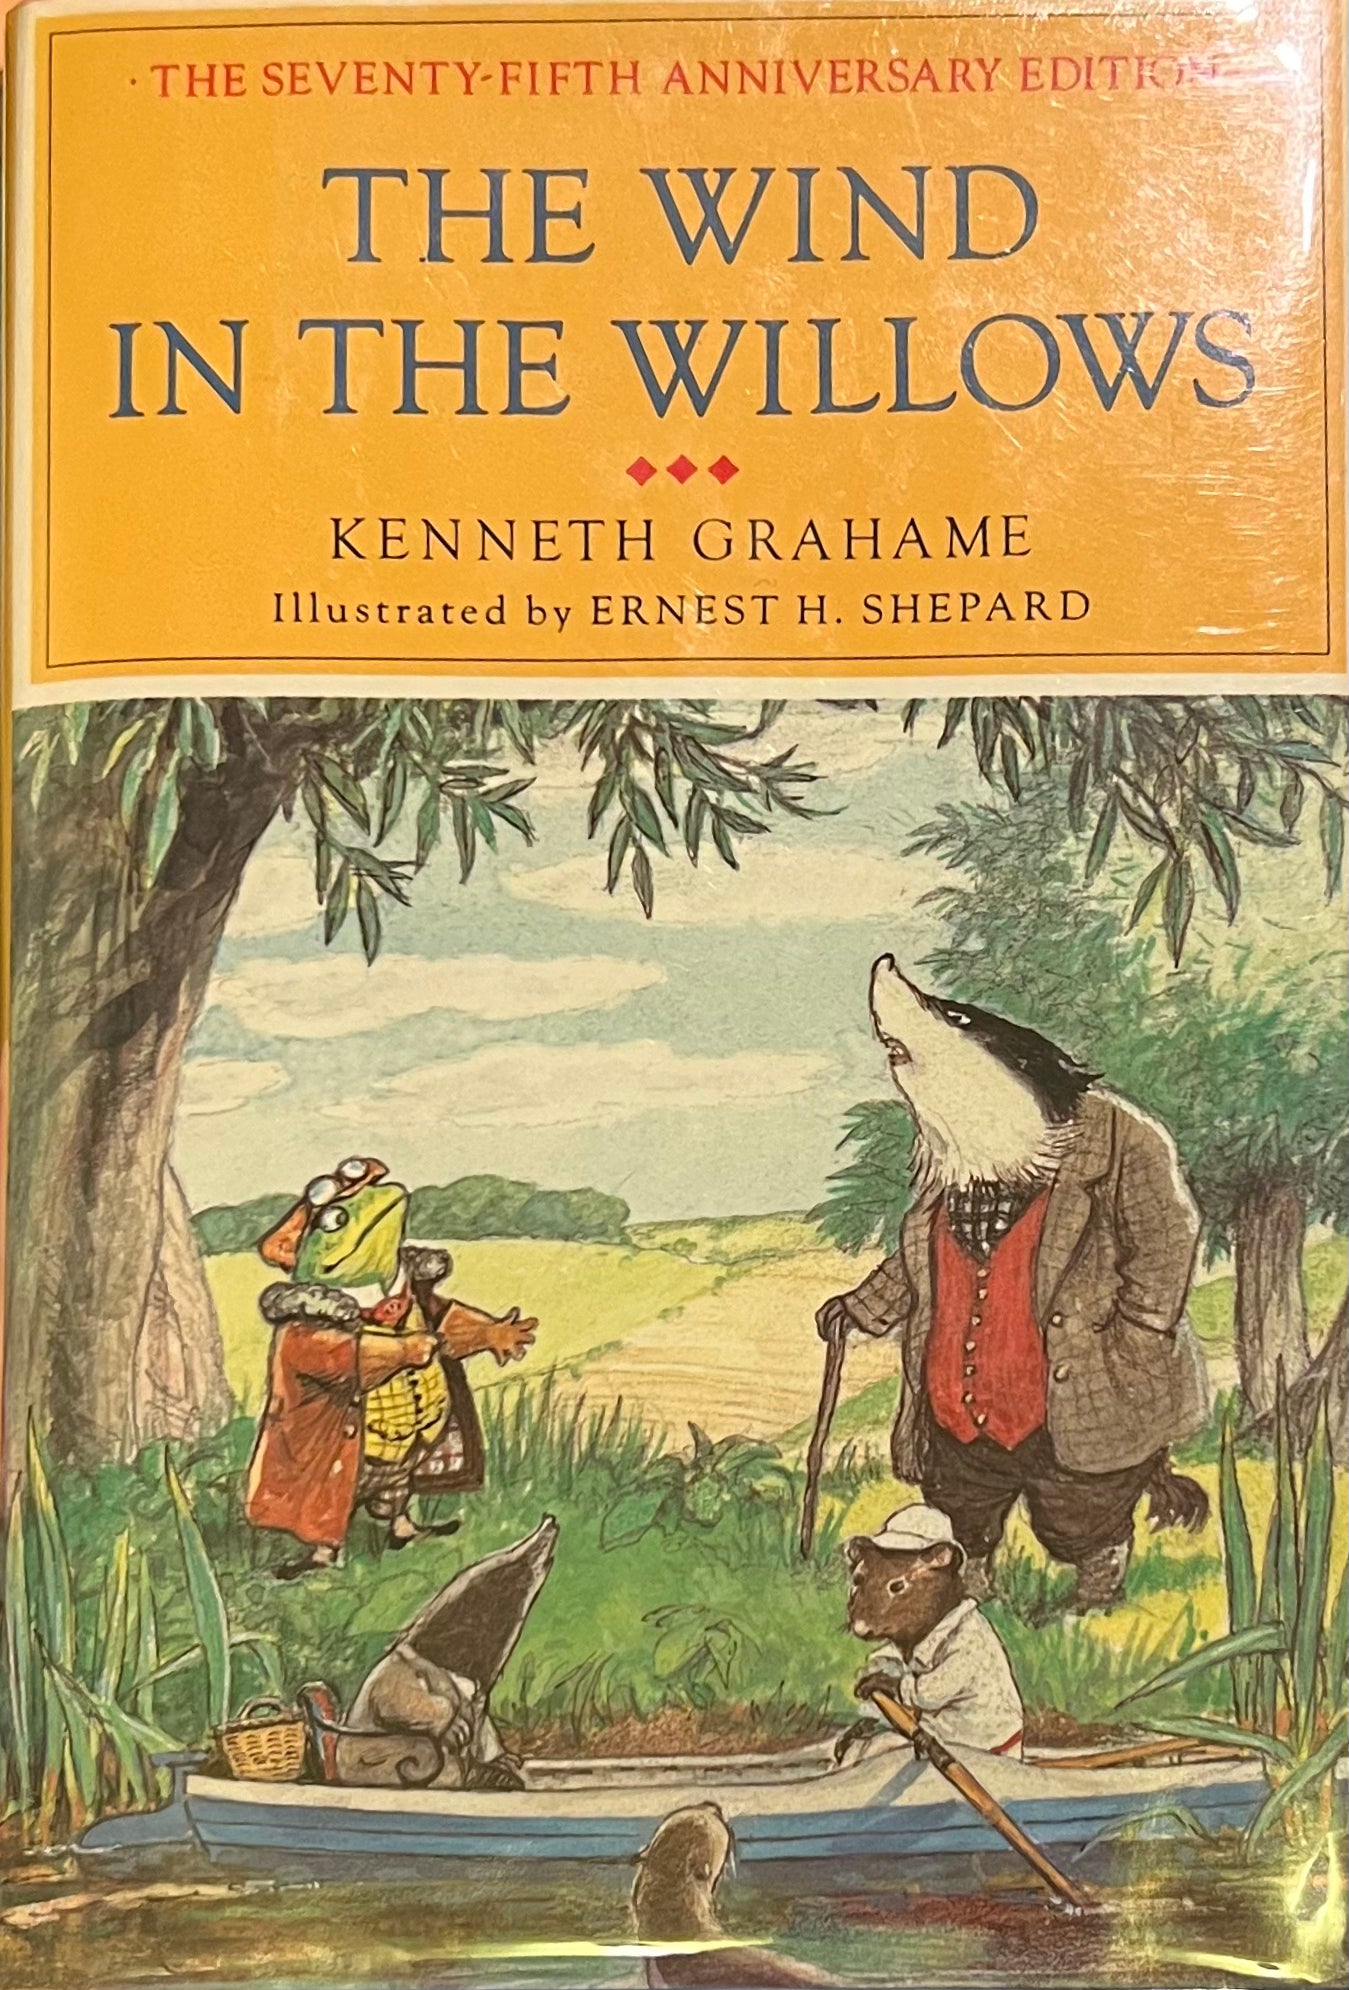 The Wind in the Willows (The 75th Anniversary Edition), Kenneth Grahame